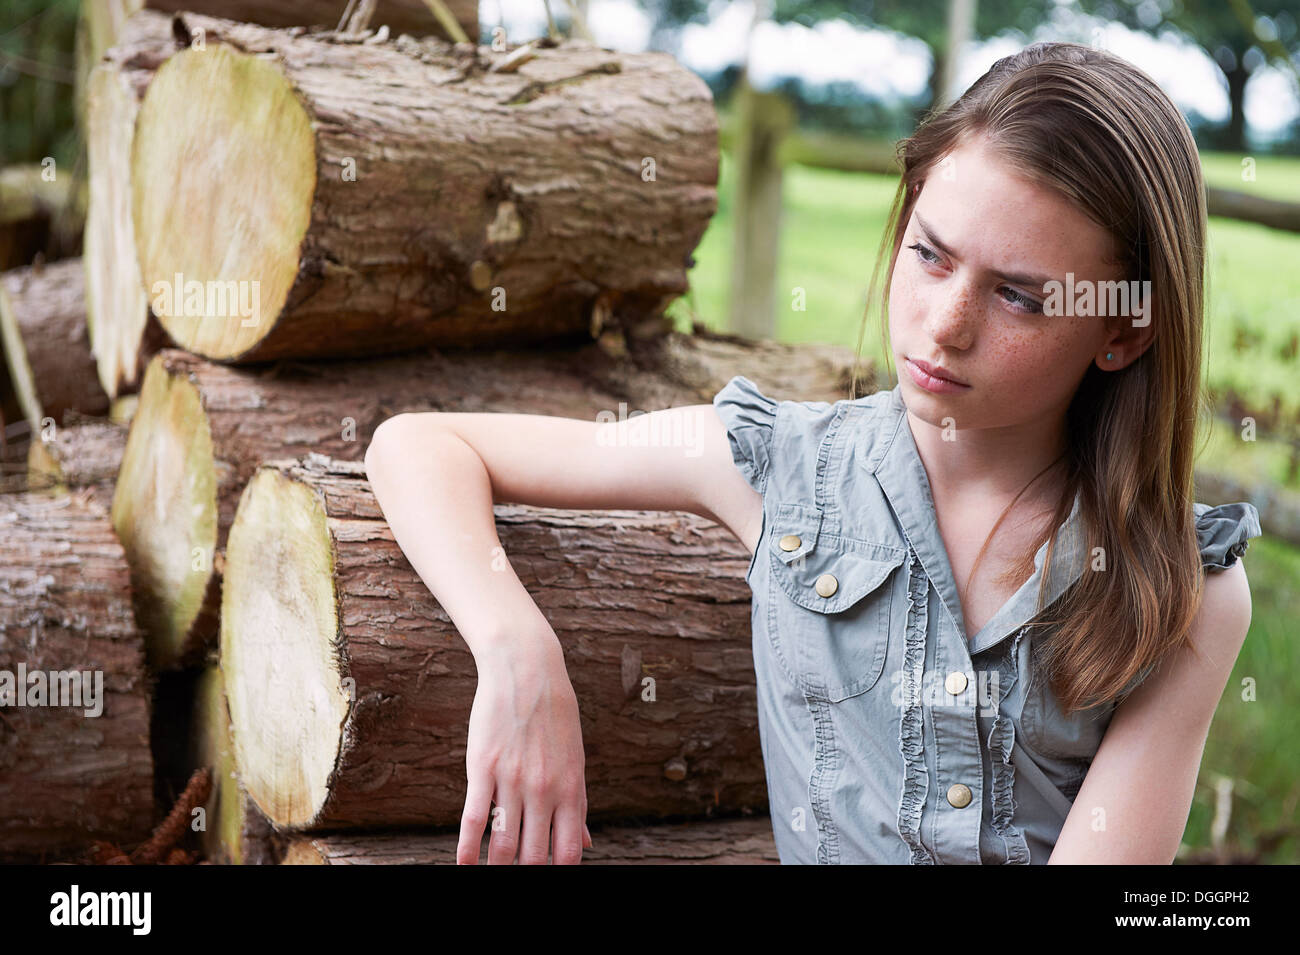 Teenage girl leaning on logs in forest Stock Photo